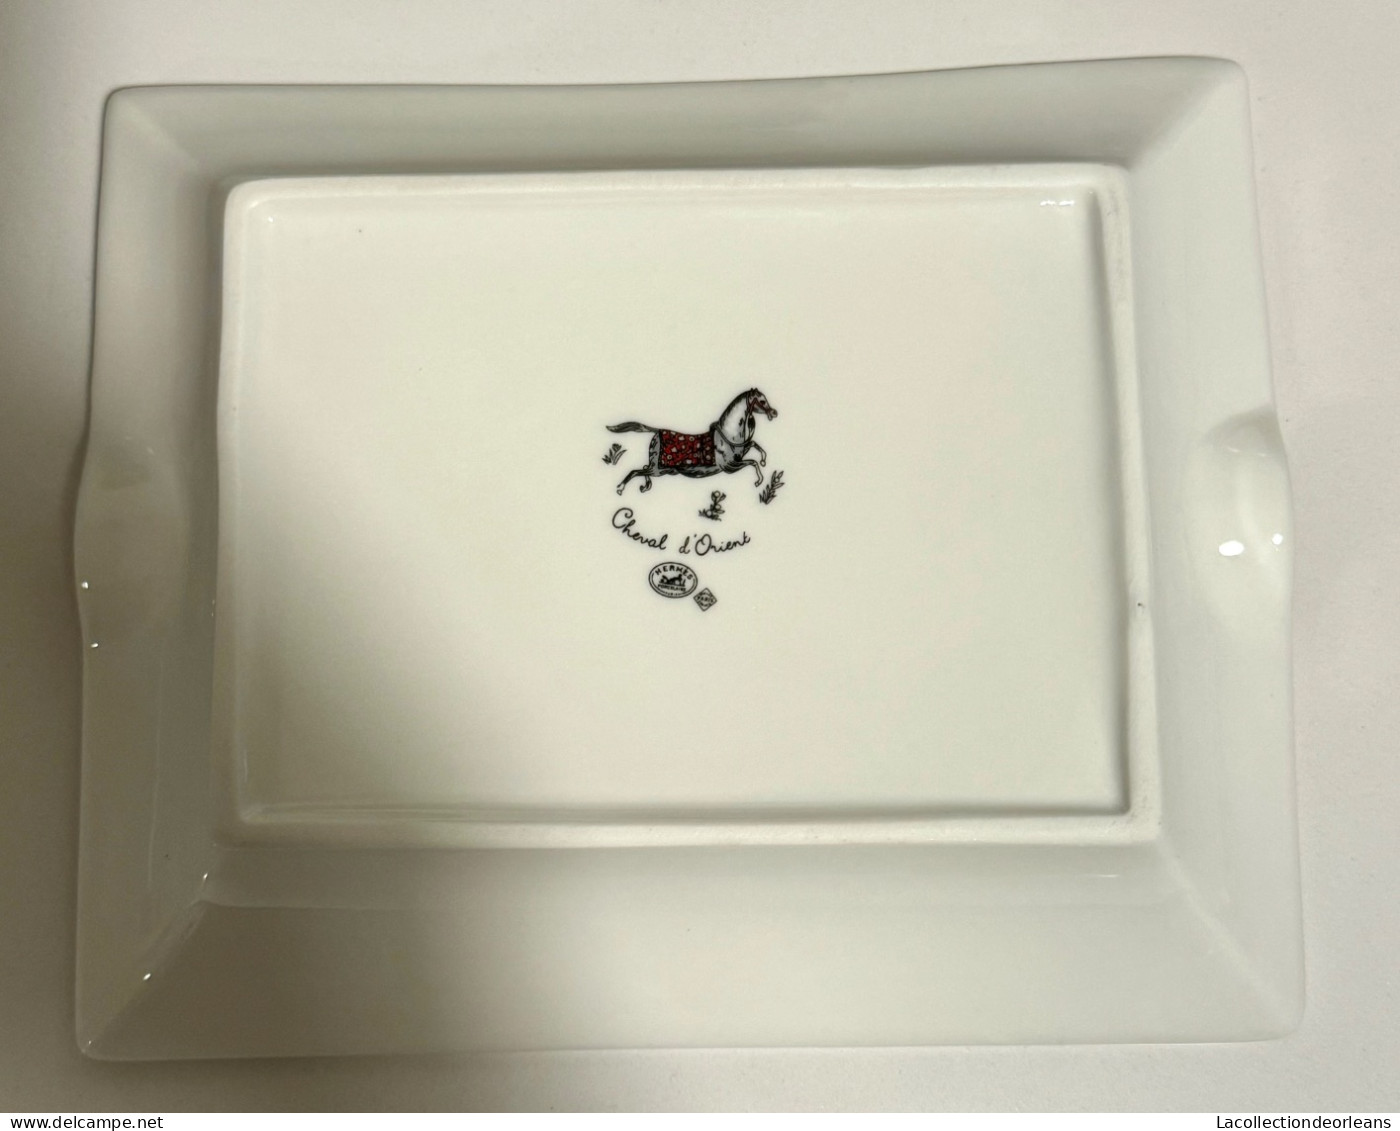 Beautiful Hermes ashtray model Cheval D’Orient